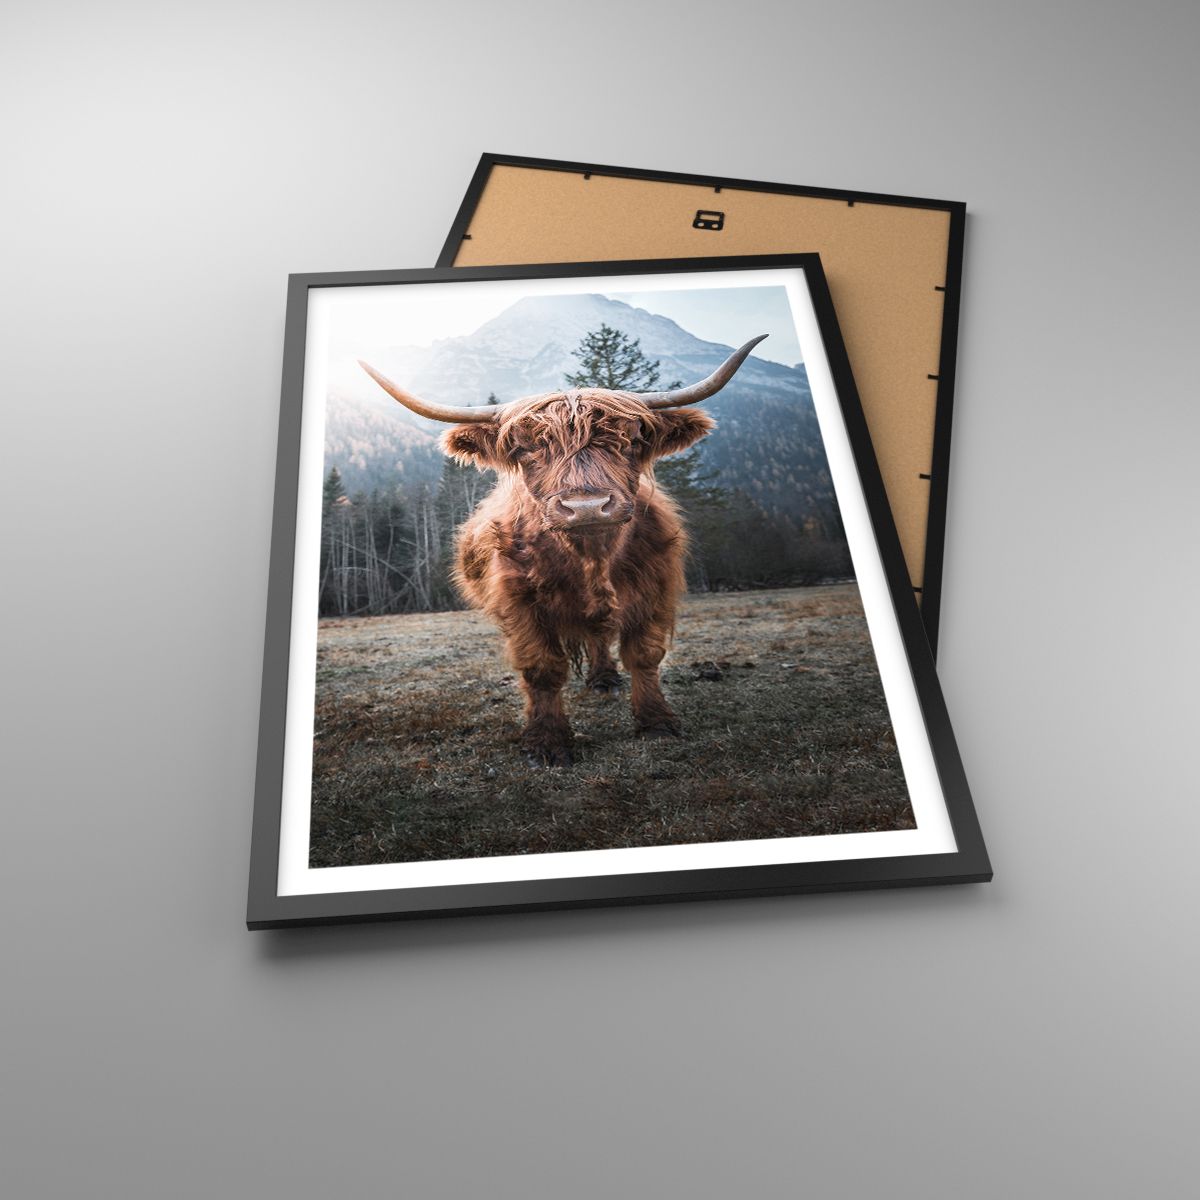 Poster Mountains, Poster Scottish Cow, Poster Pasture, Poster Animals, Poster Landscape